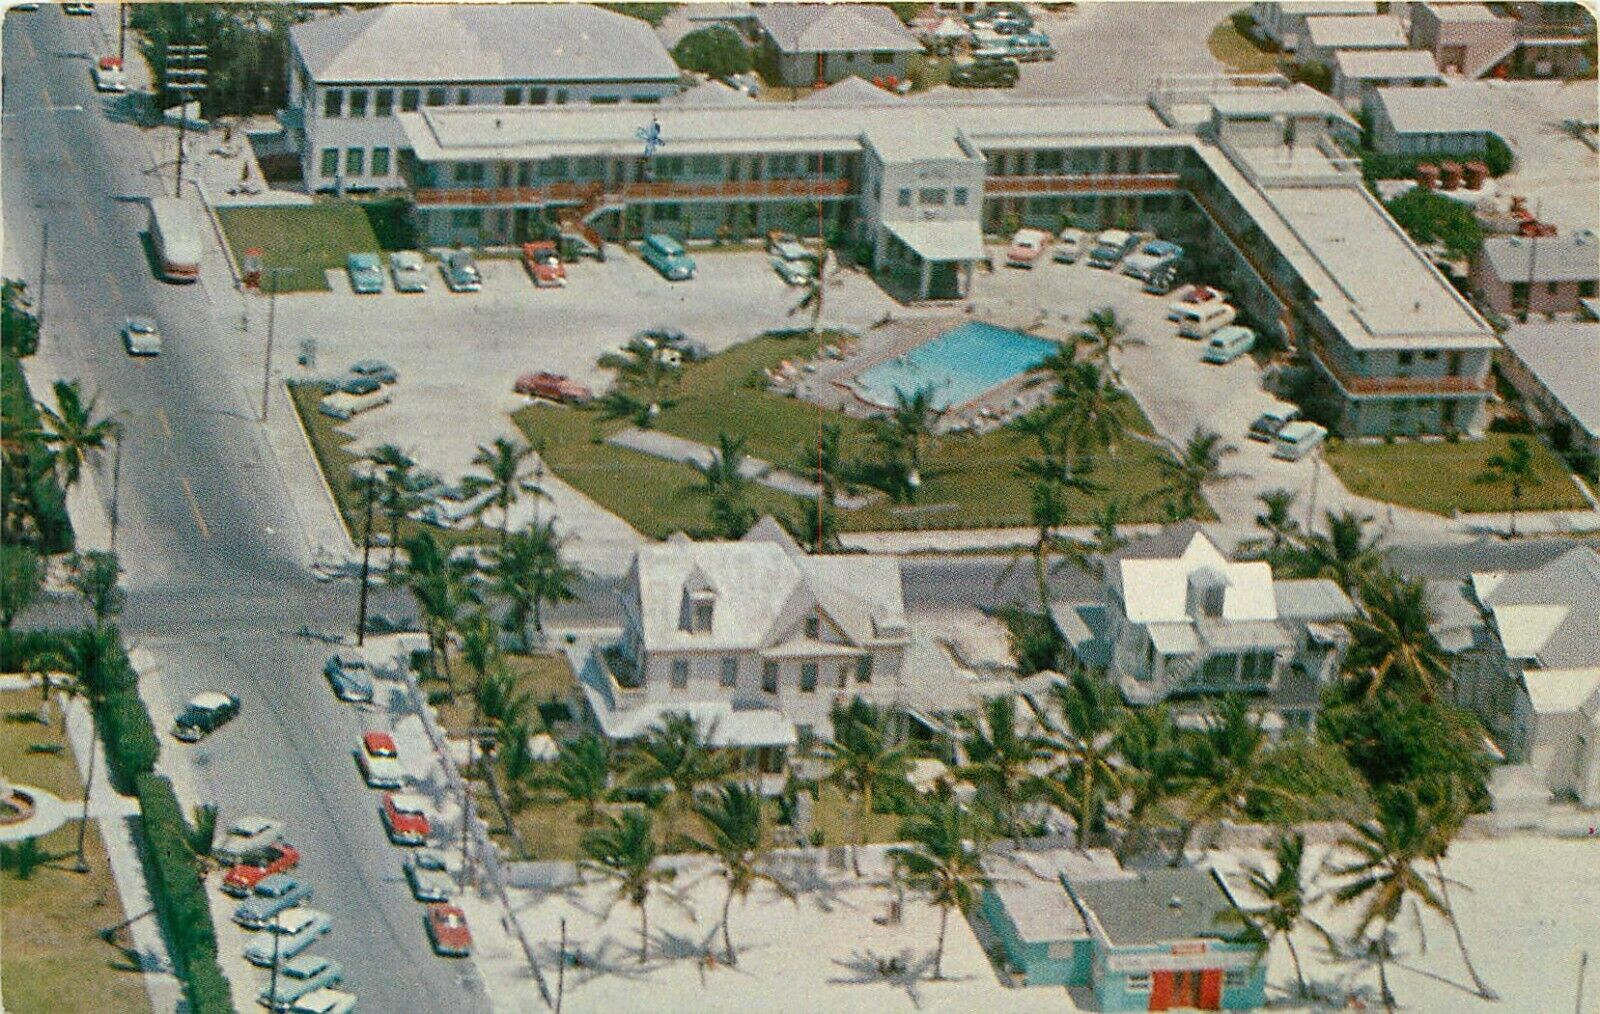 Southern Most Motel Key West Florida FL  pm 1957 South and Duval Postcard